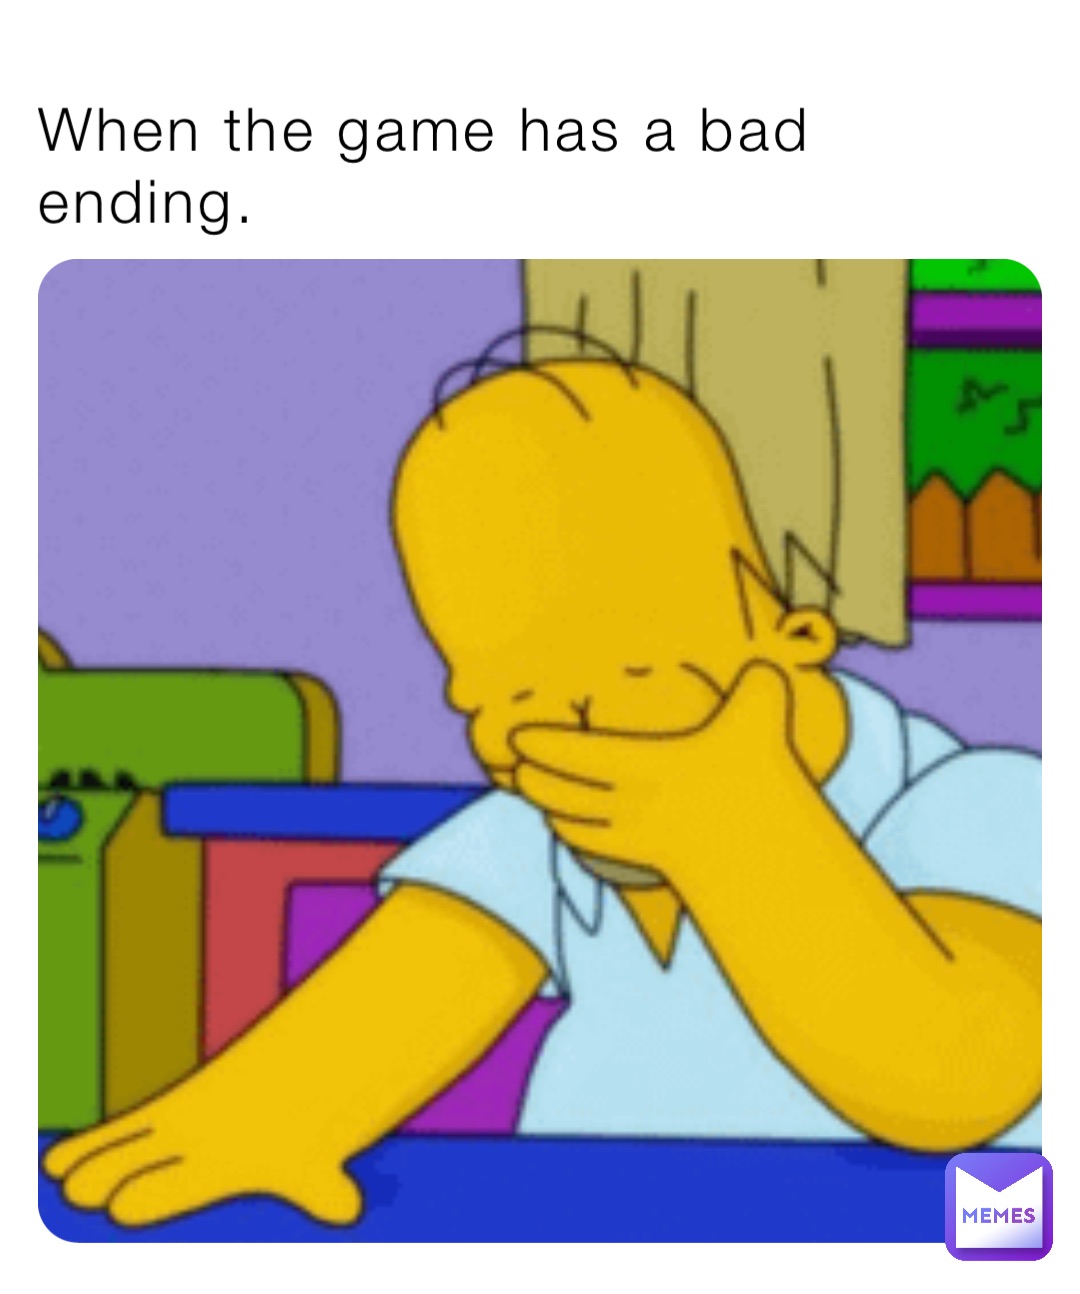 When the game has a bad ending.